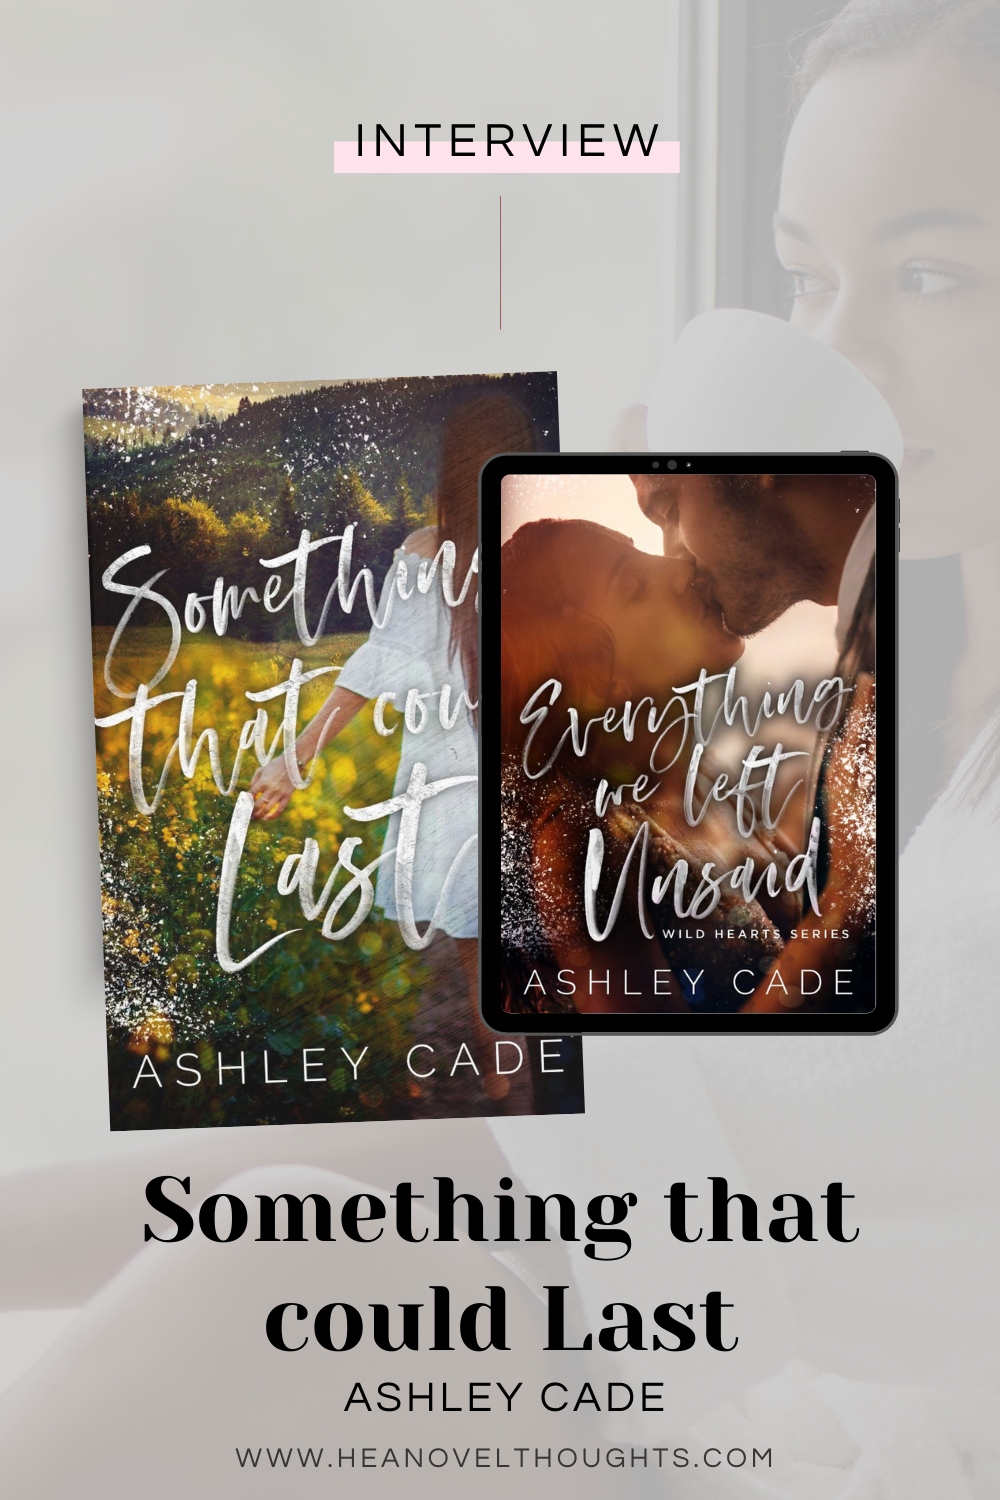 Exclusive Interview & Excerpt with Ashley Cade